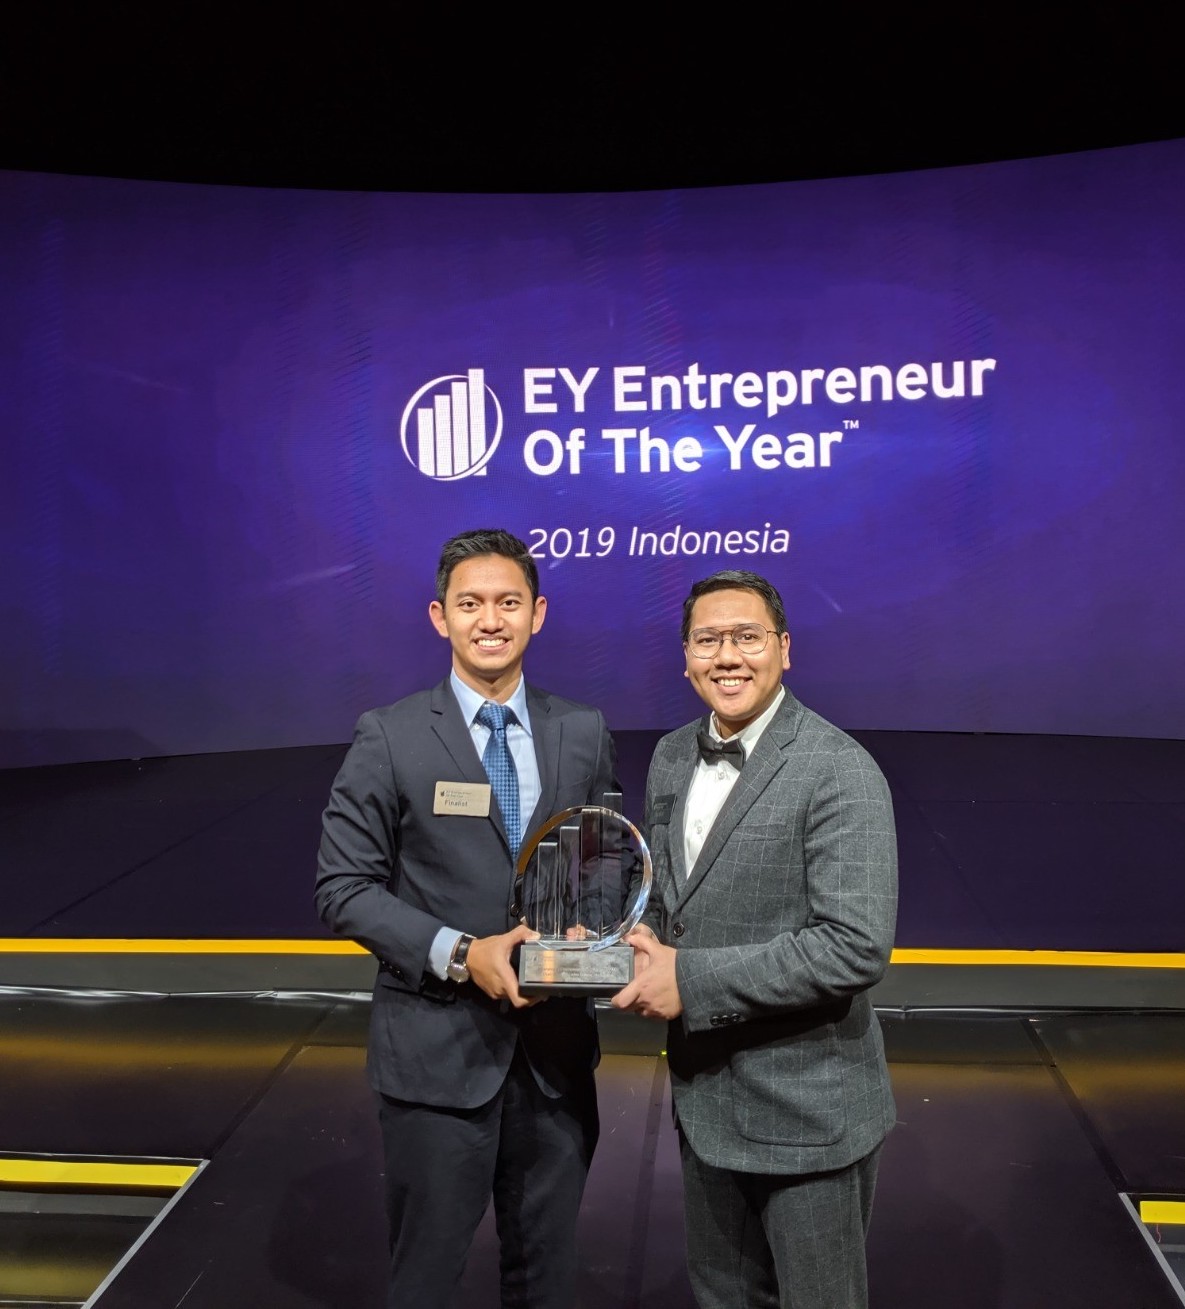 Iman Usman and his co-founder are honored at the EY Awards.